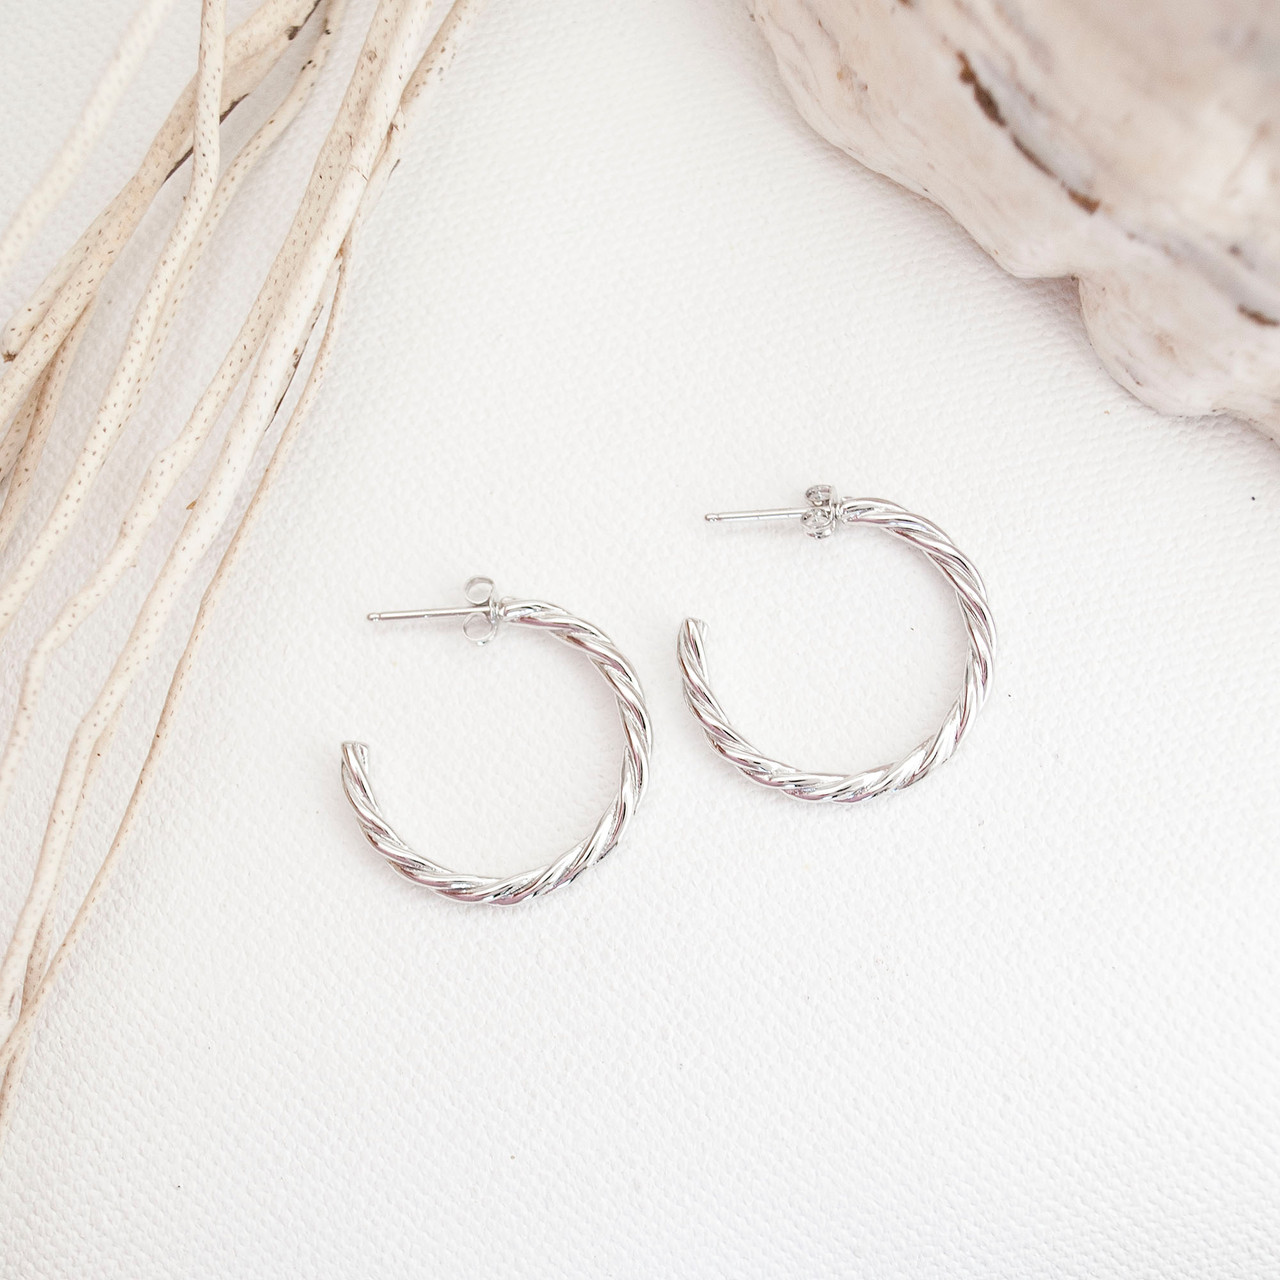 Shop Silver Rope Hoops: Choose from Gold or Silver